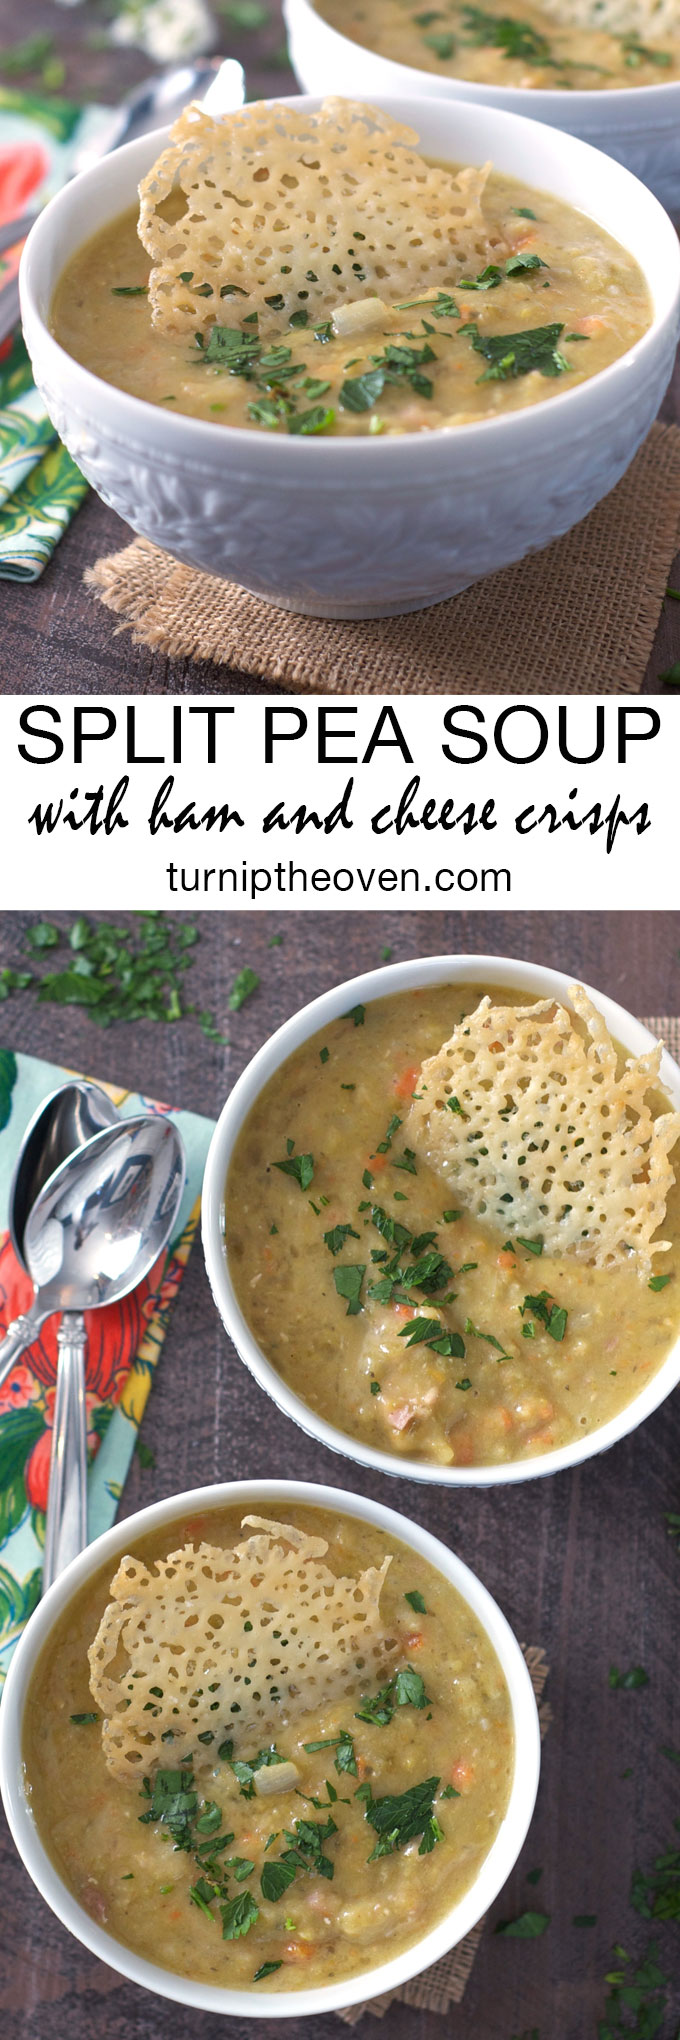 This delicious, wholesome, gluten-free split pea soup is the perfect way to use up leftover holiday ham, and the simple cheese crisps make it oh-so-elegant!